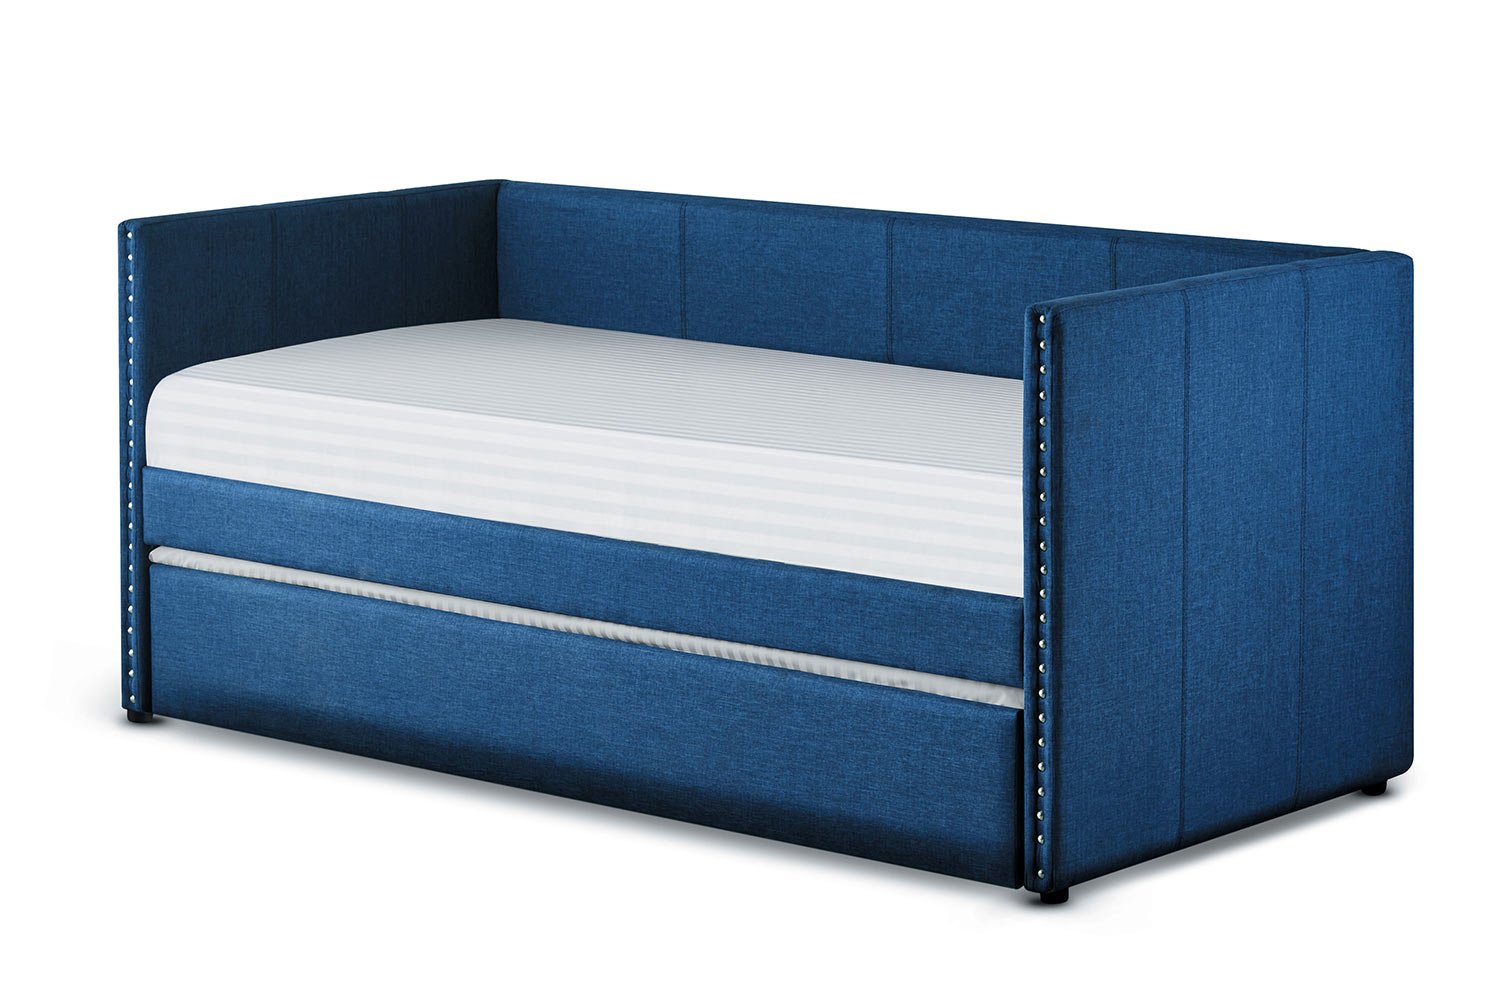 Homelegance Therese Daybed with Trundle - Blue